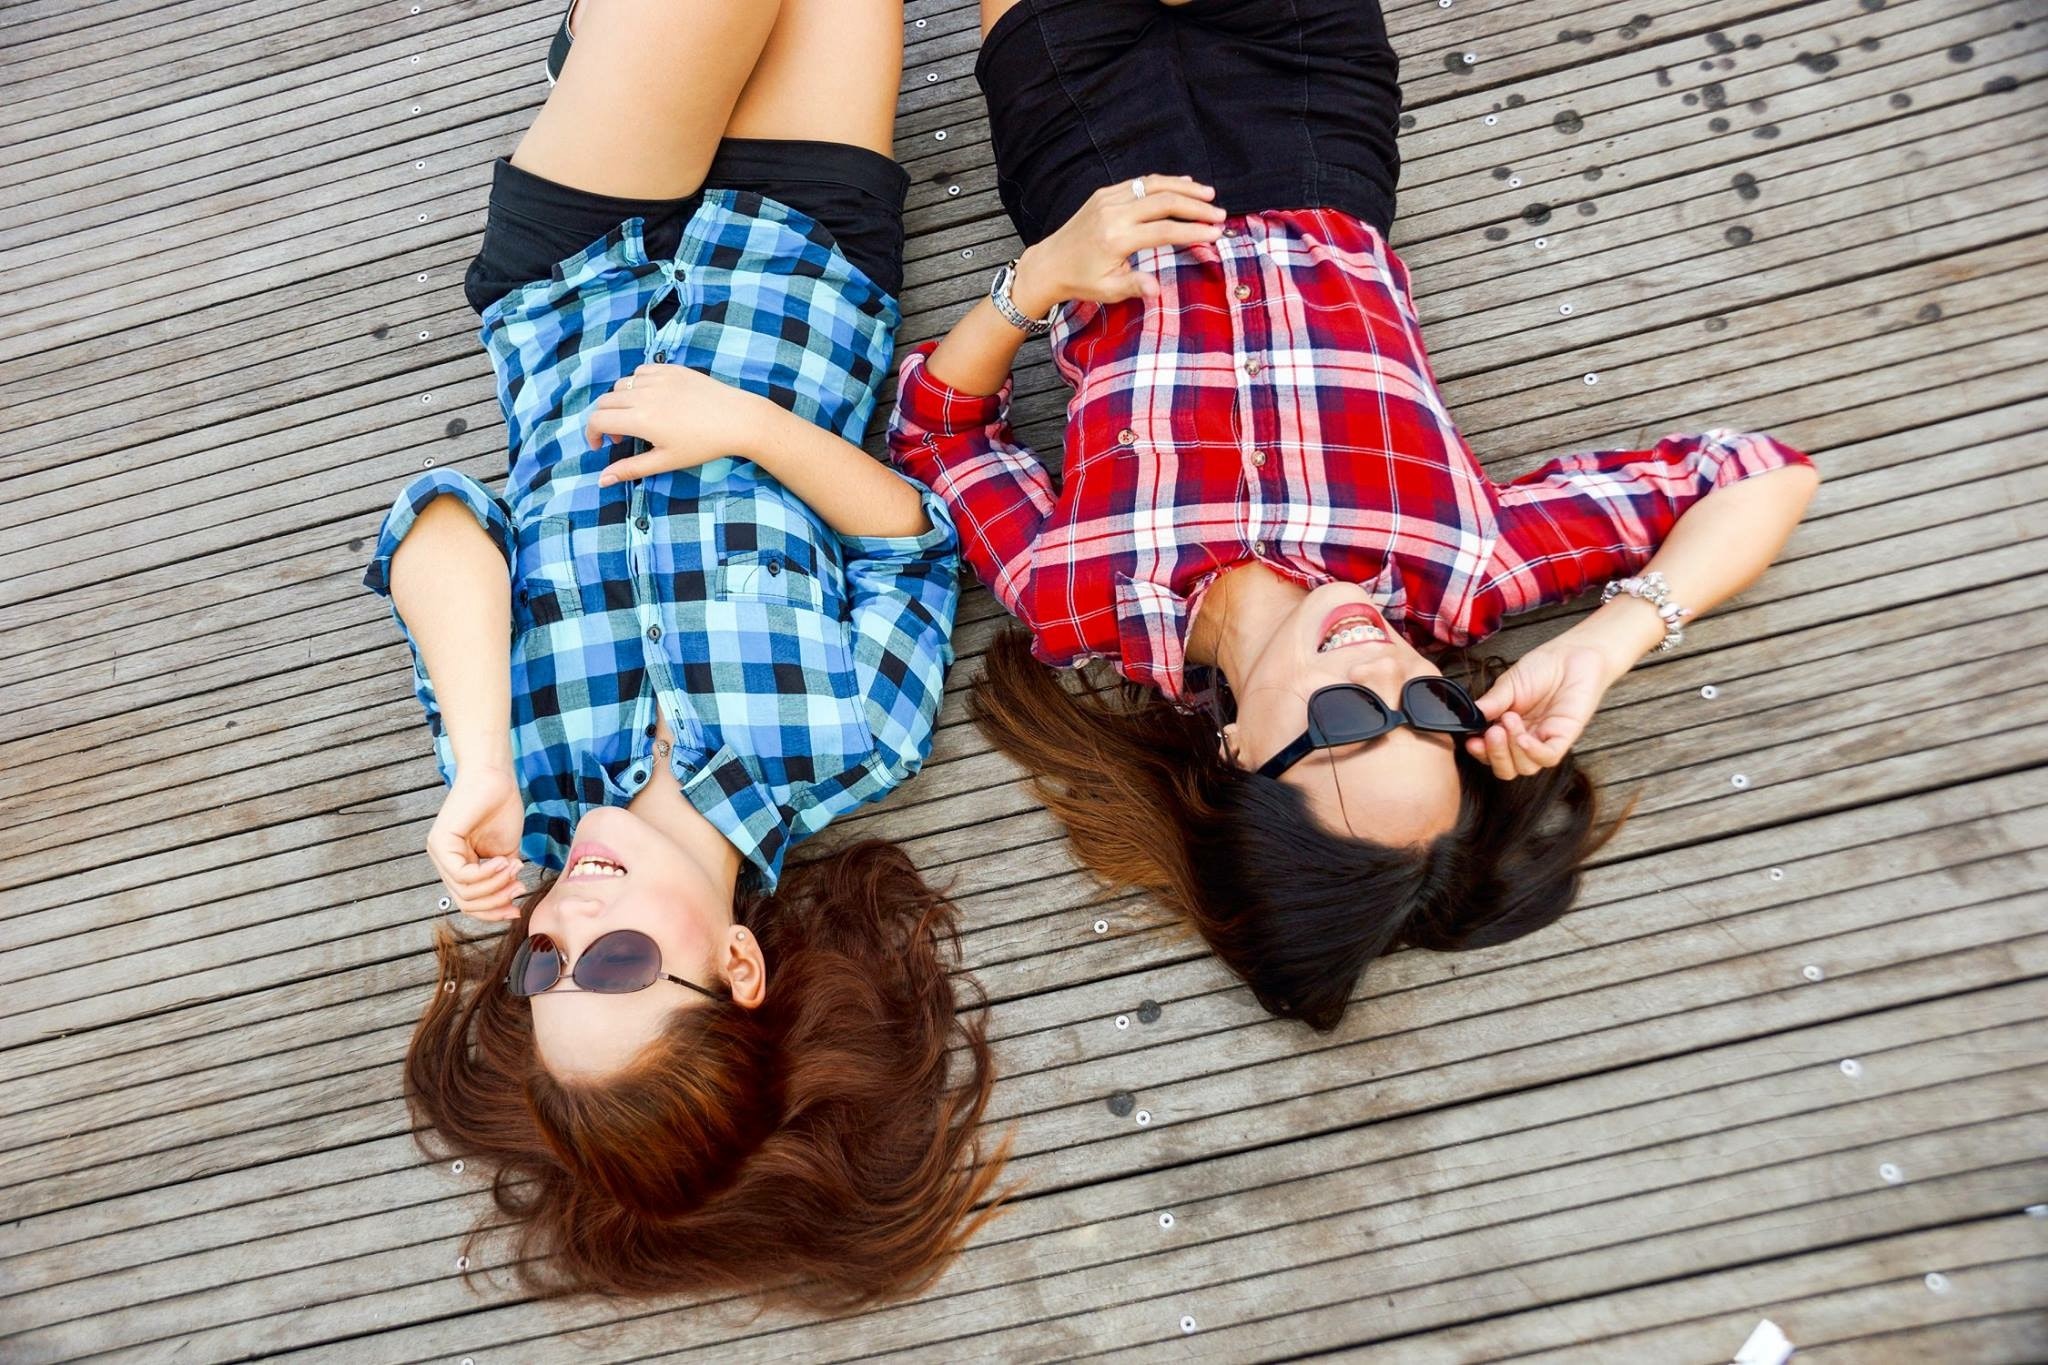 Lying on the ground, two friends hang out with their shades on.